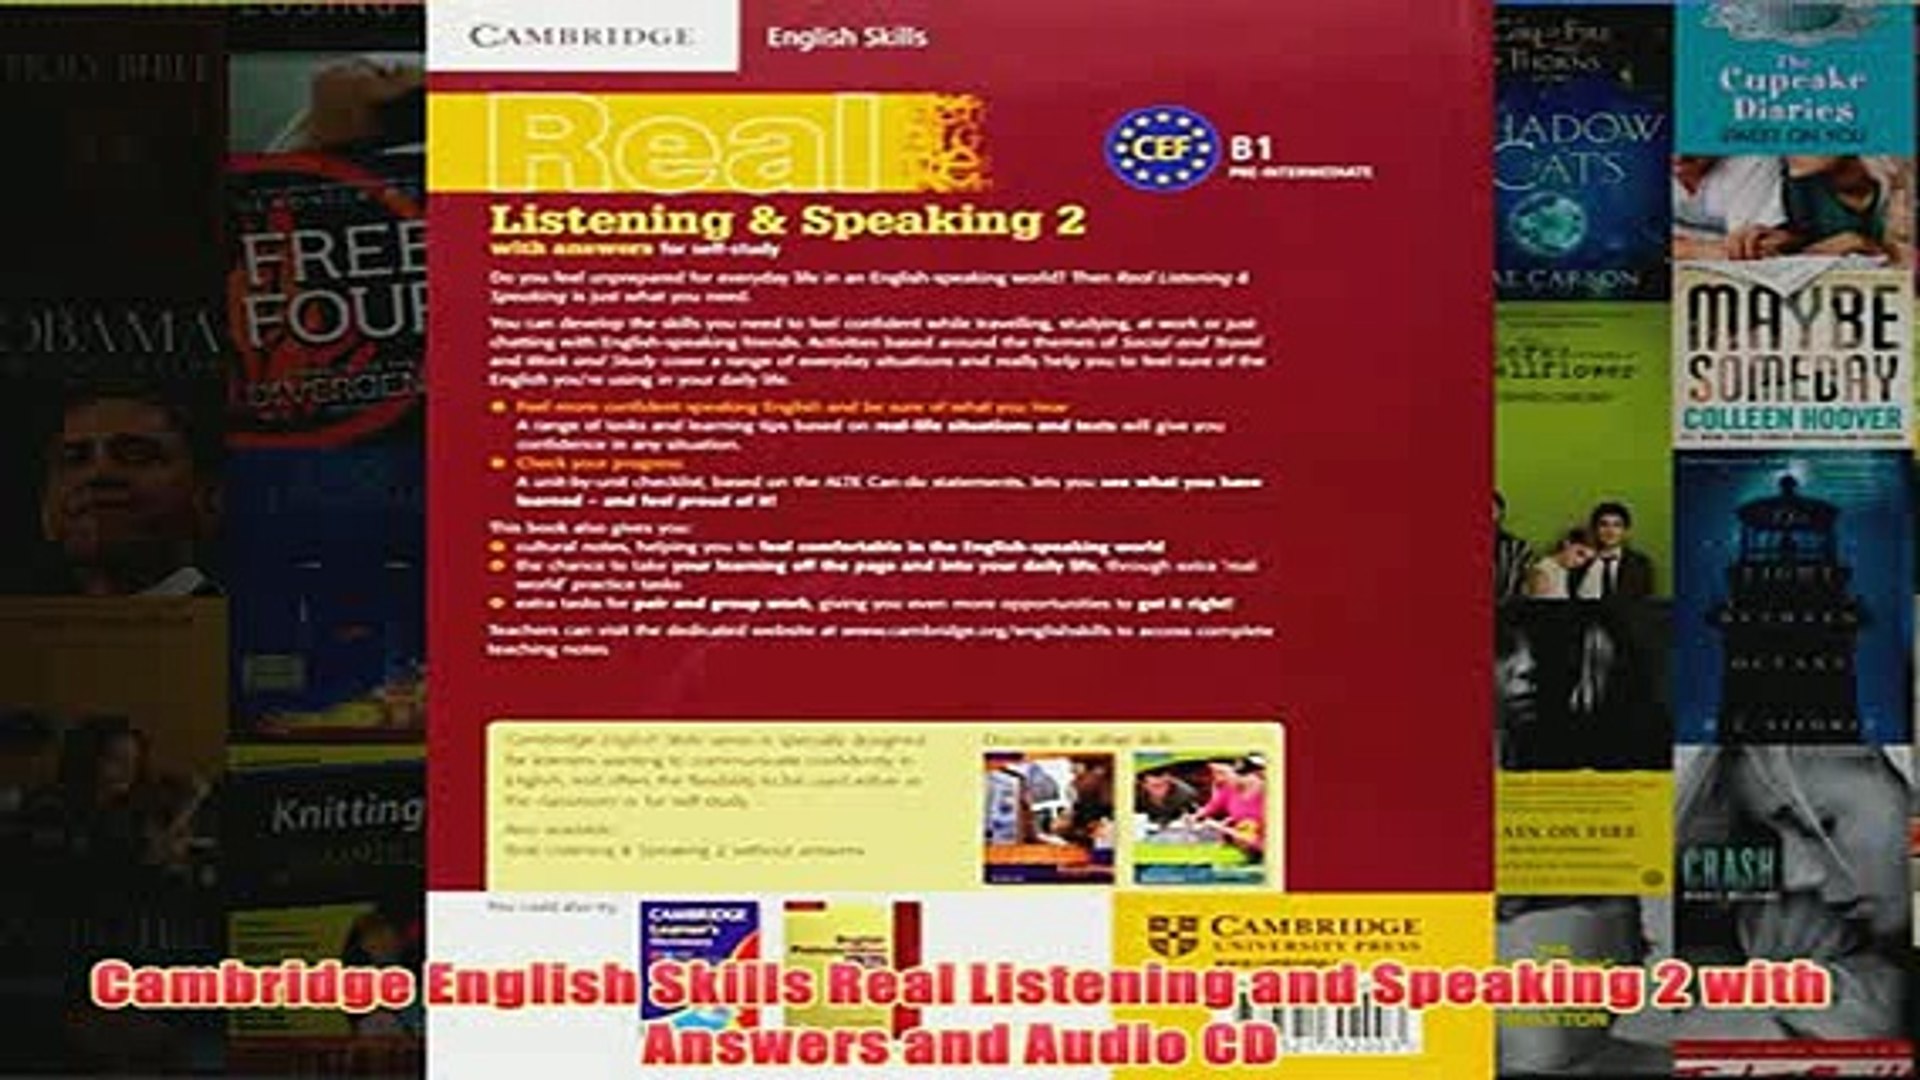 Download PDF Cambridge English Skills Real Listening and Speaking 2 with  Answers and Audio CD FULL FREE - video Dailymotion